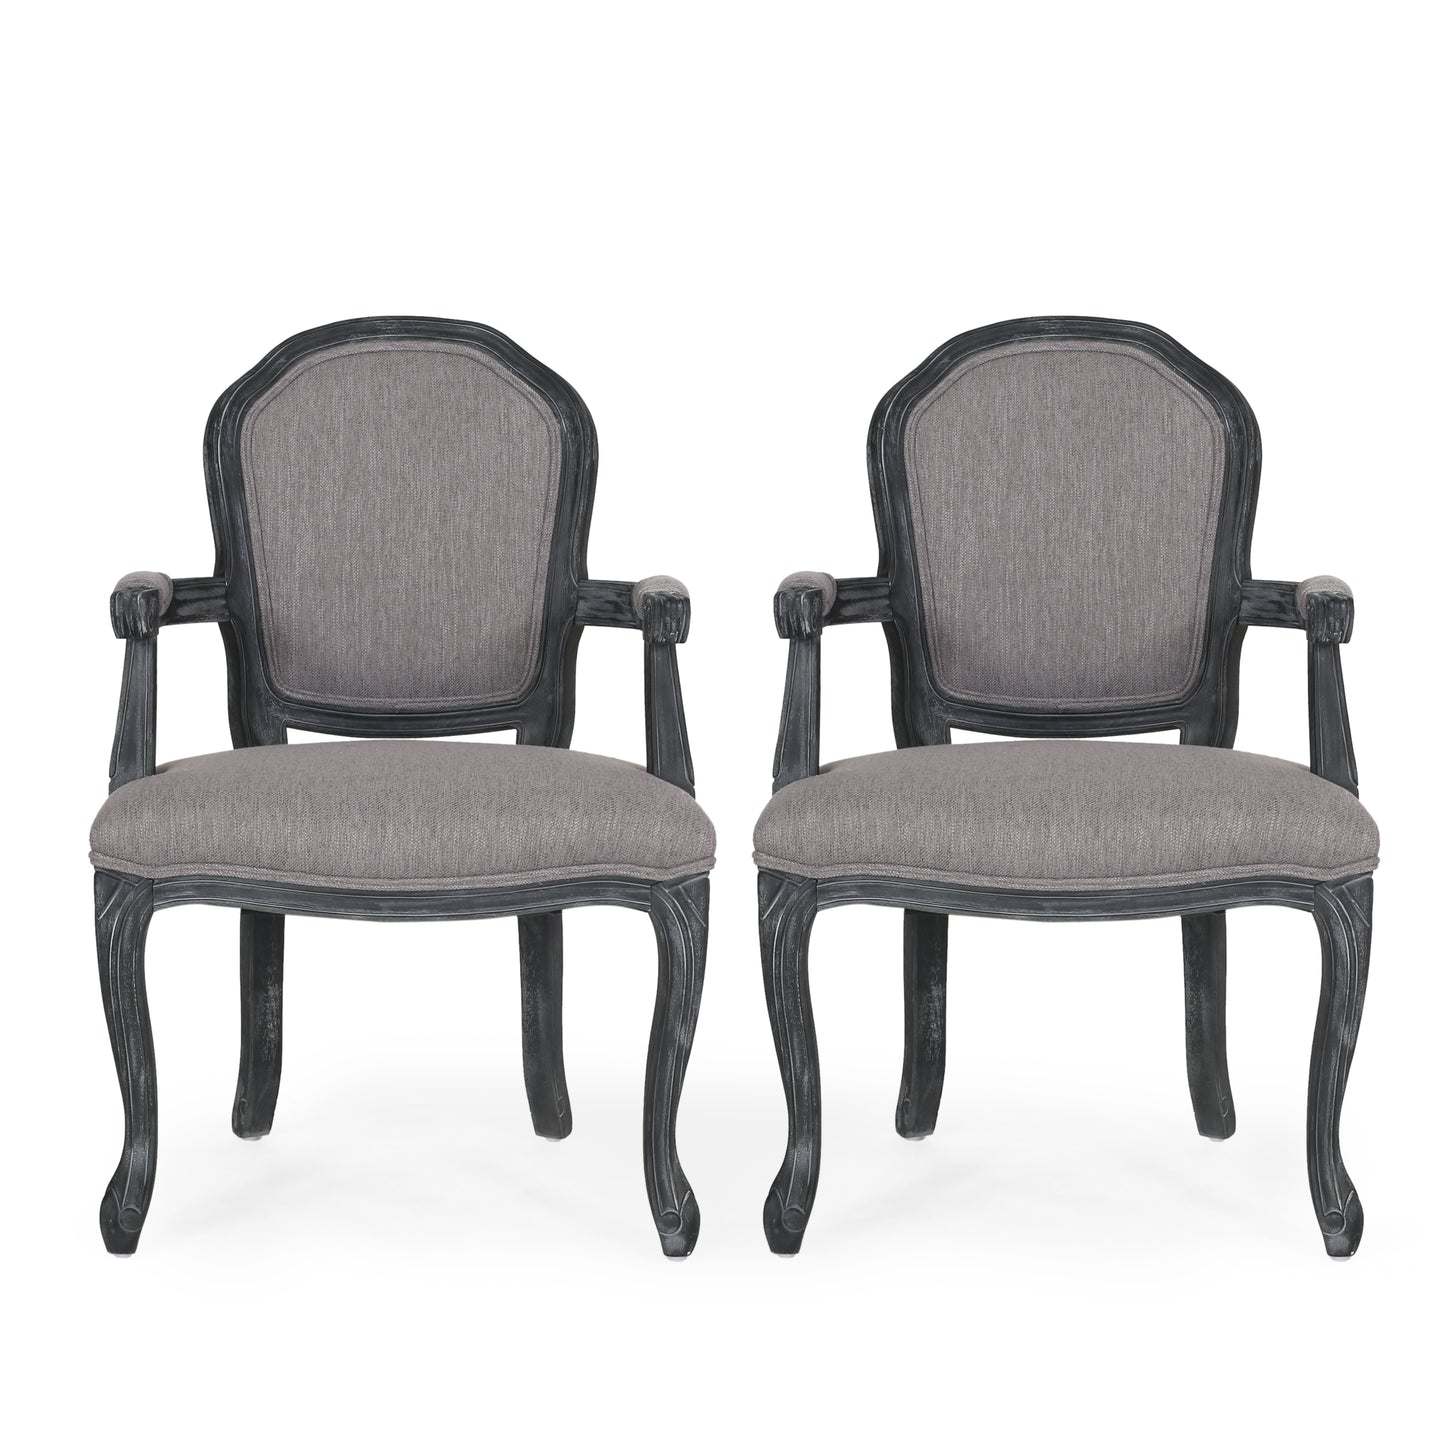 Fairgreens Traditional Upholstered Dining Chairs, Set of 2